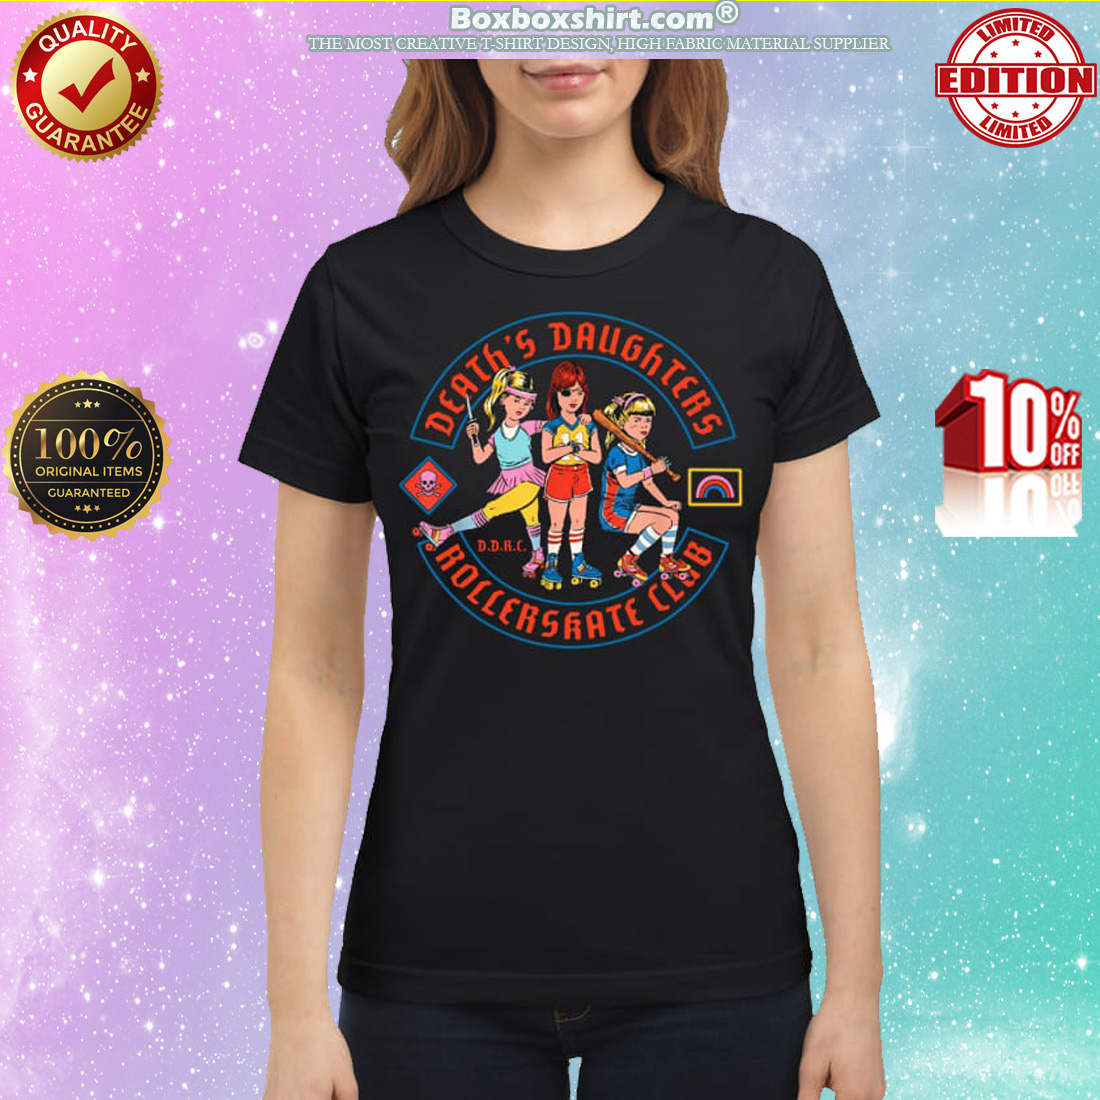 Death's daughters roller skate club shirt